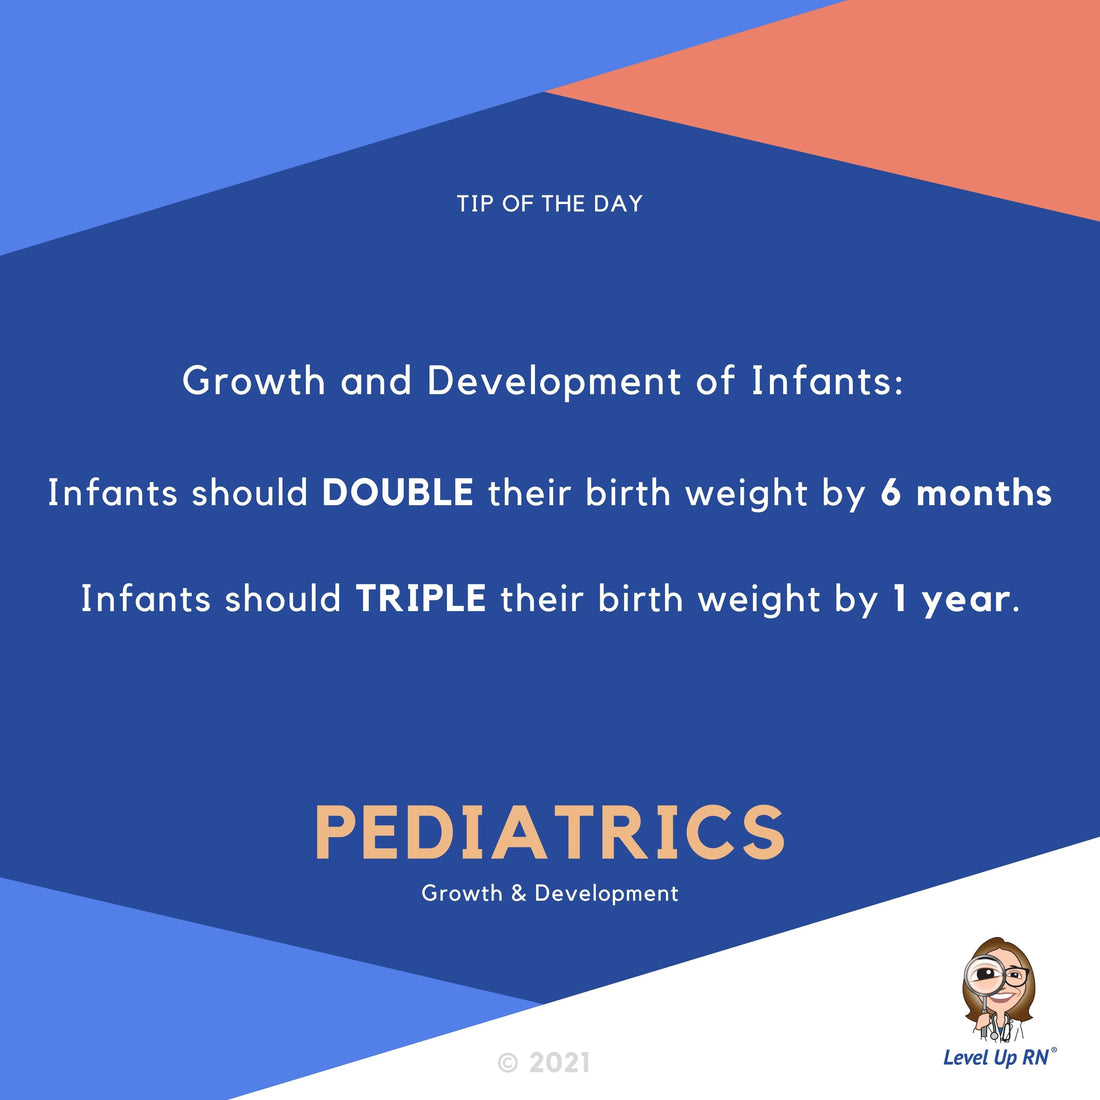 Infants should DOUBLE their birthweight by 6 months, and TRIPLE their birthweight by 1 year. 